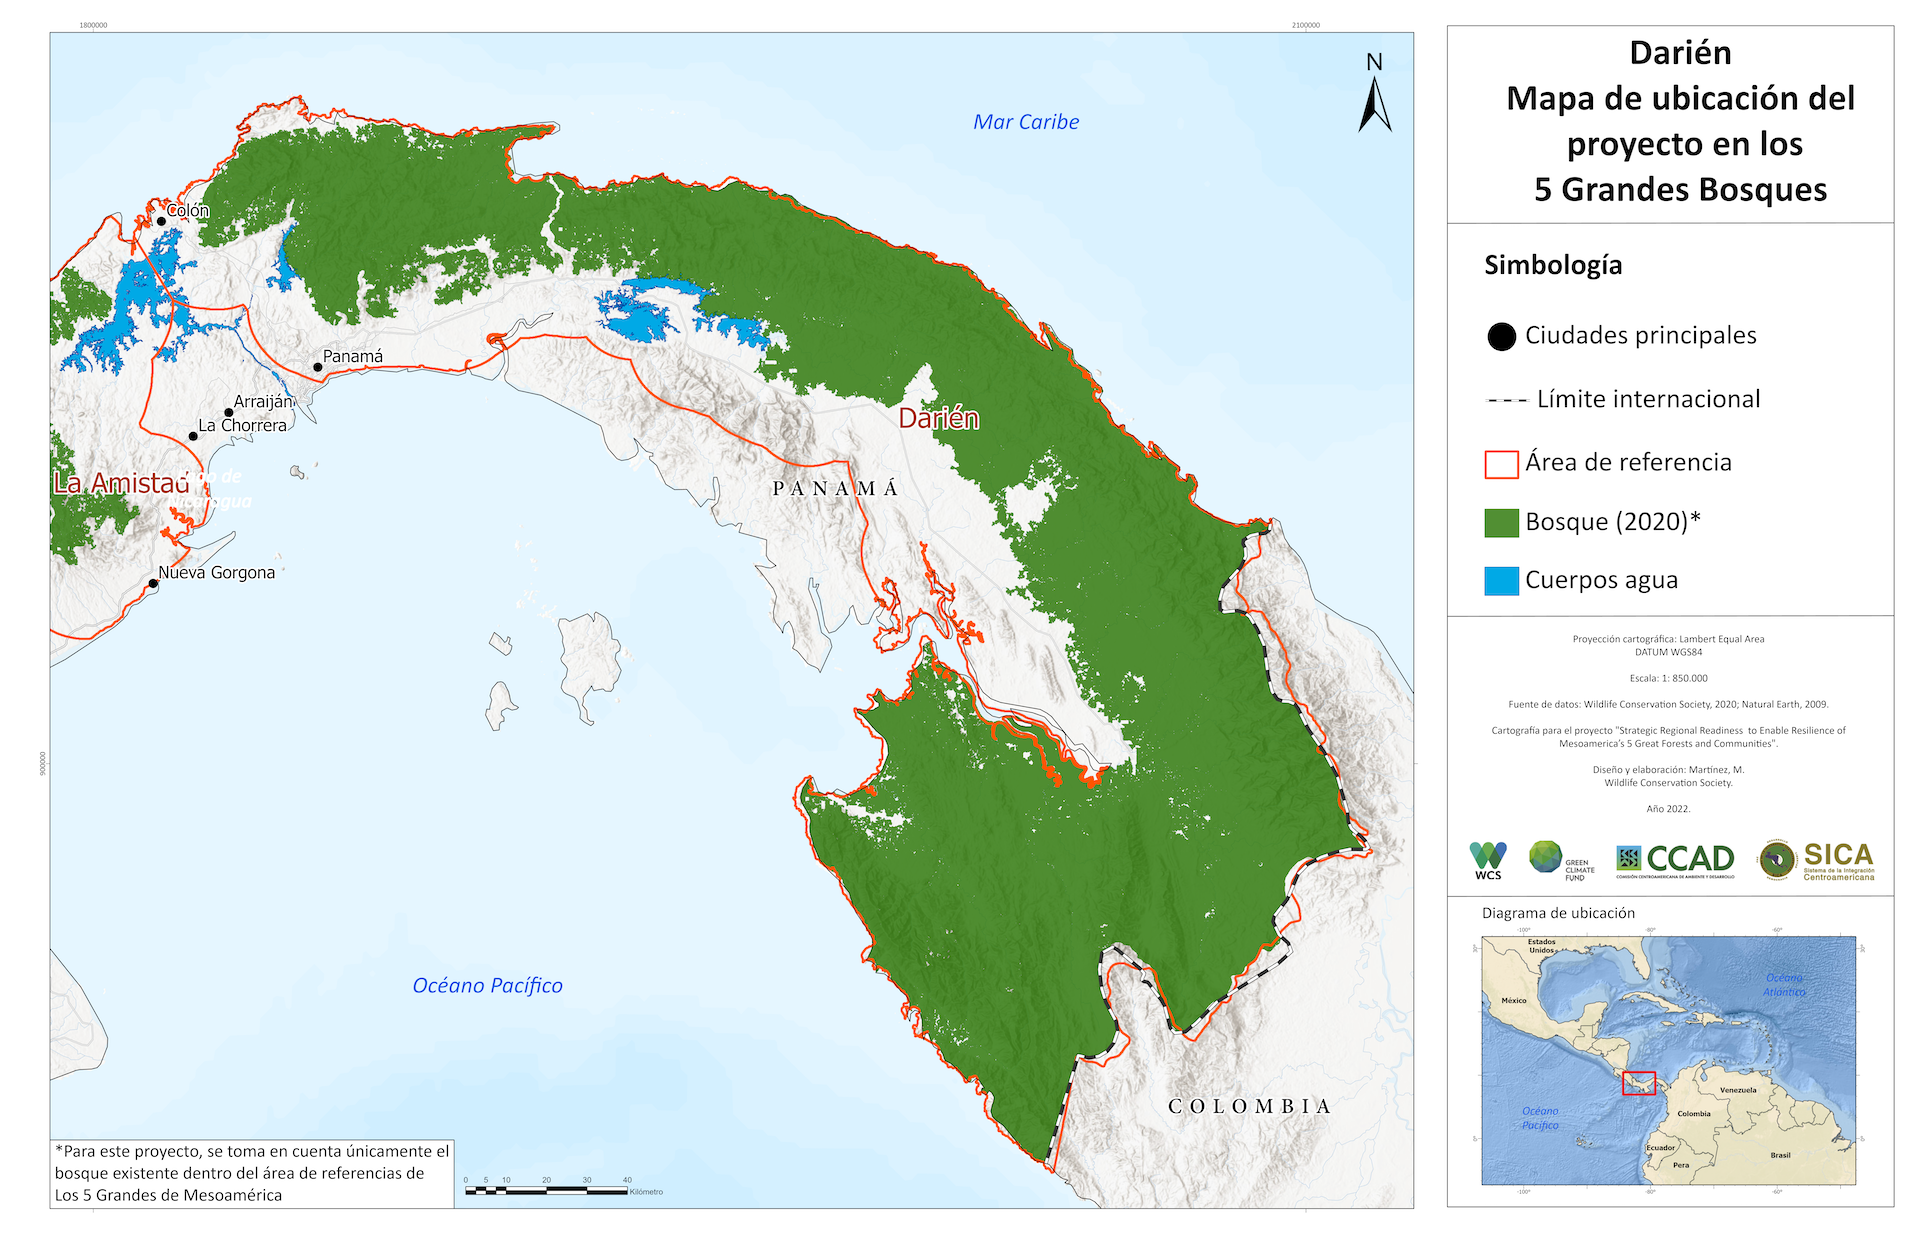 Darién Location map of the project in the 5 major forests.